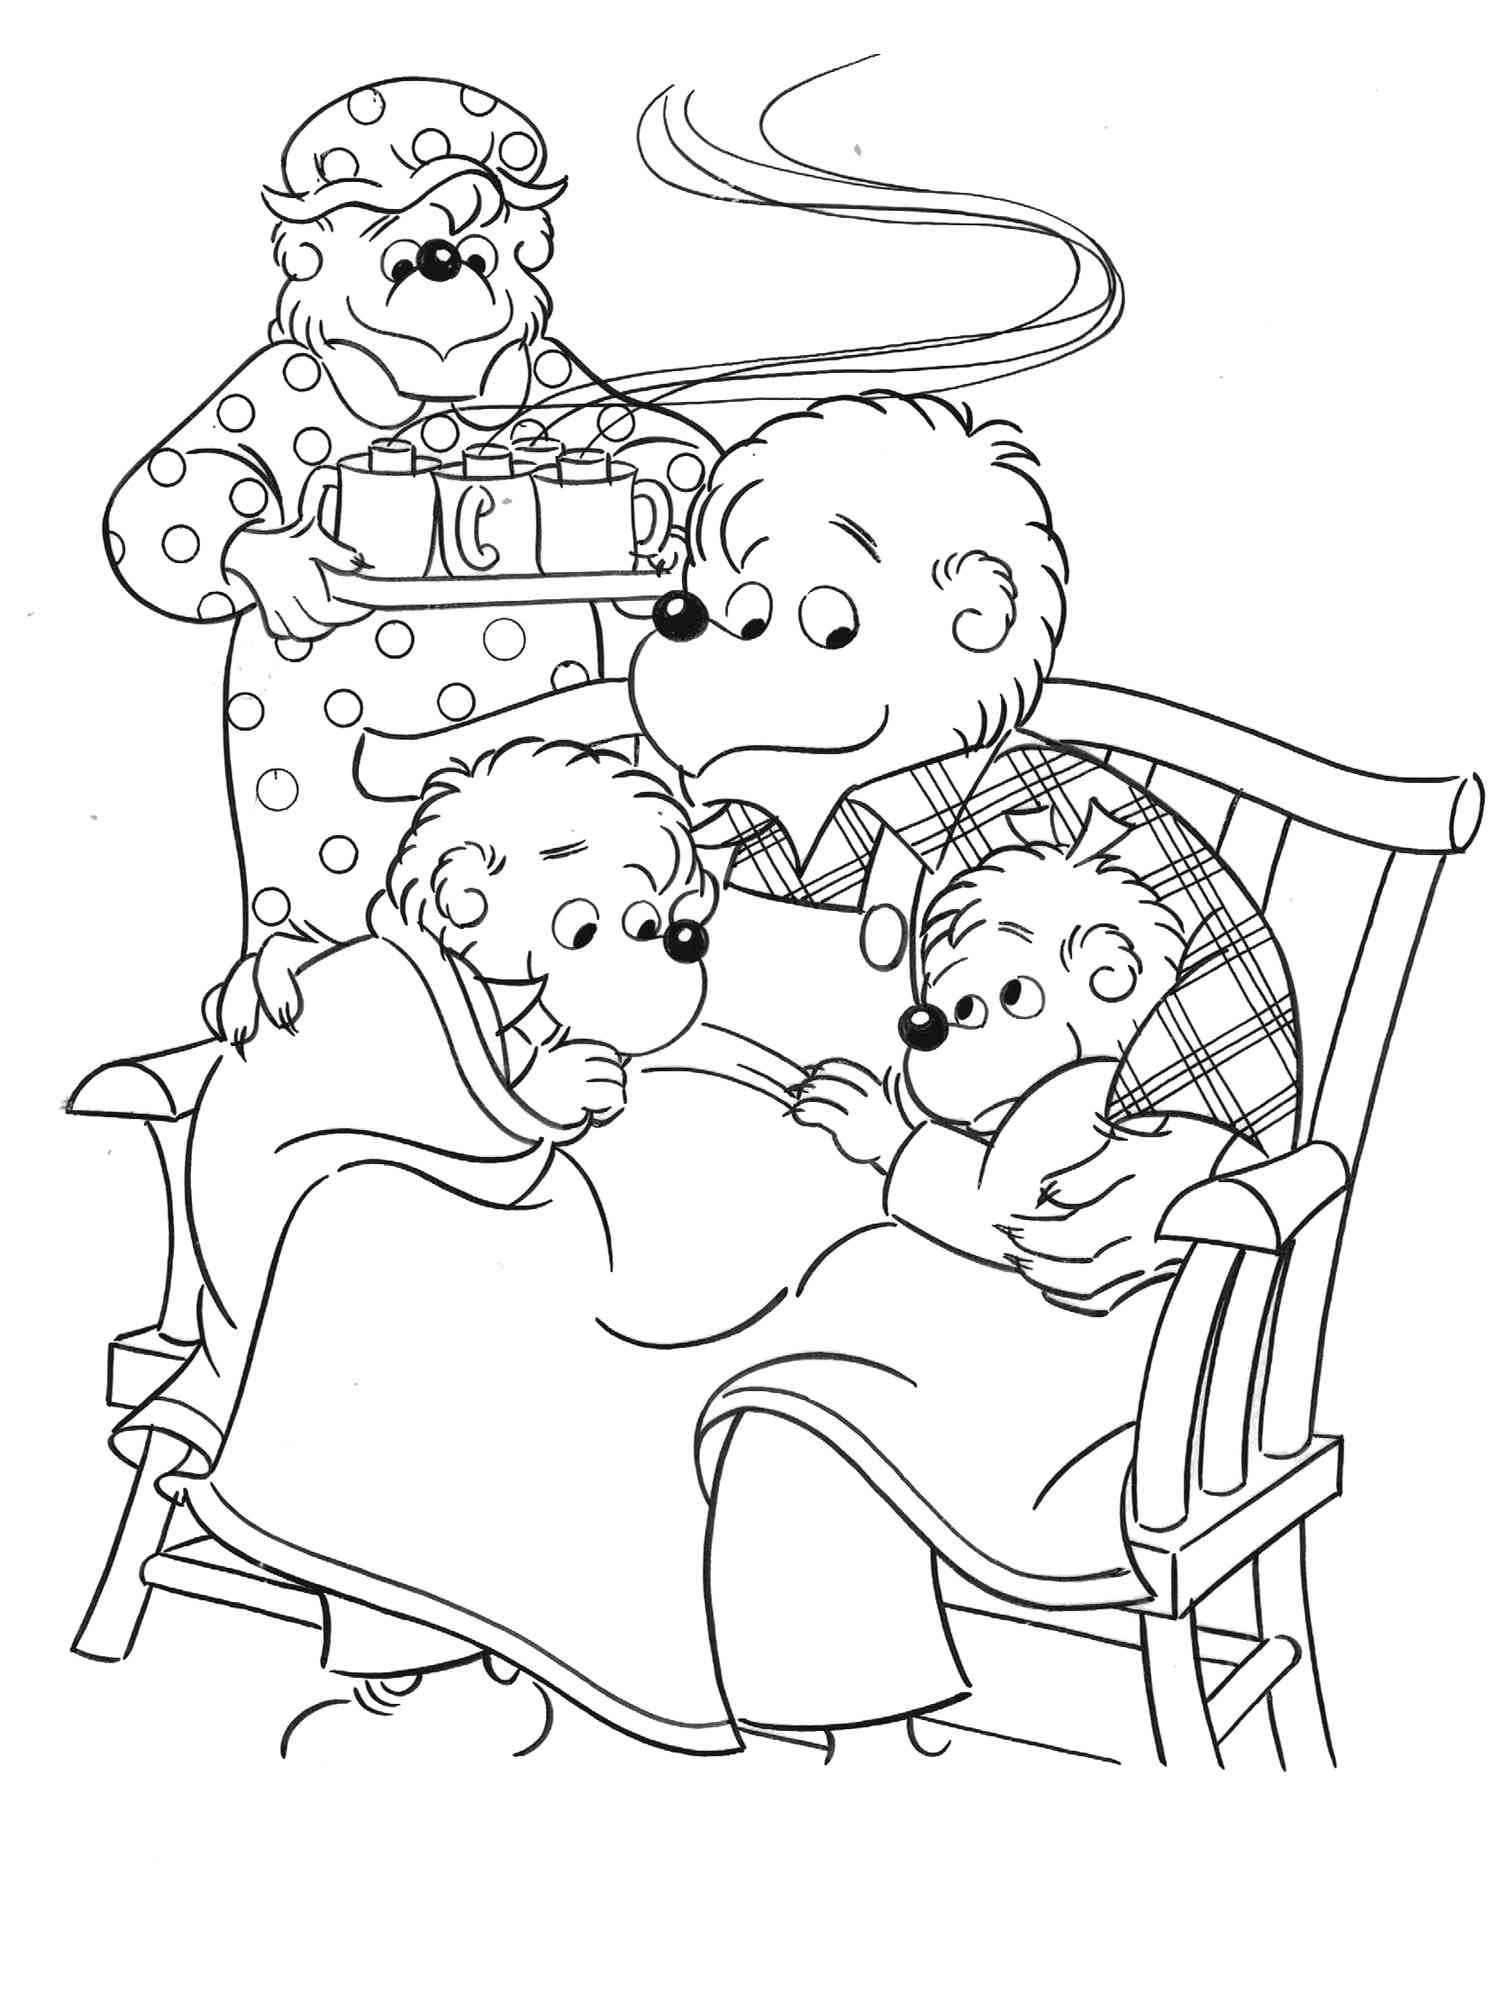 Berenstain Bears 10 coloring page